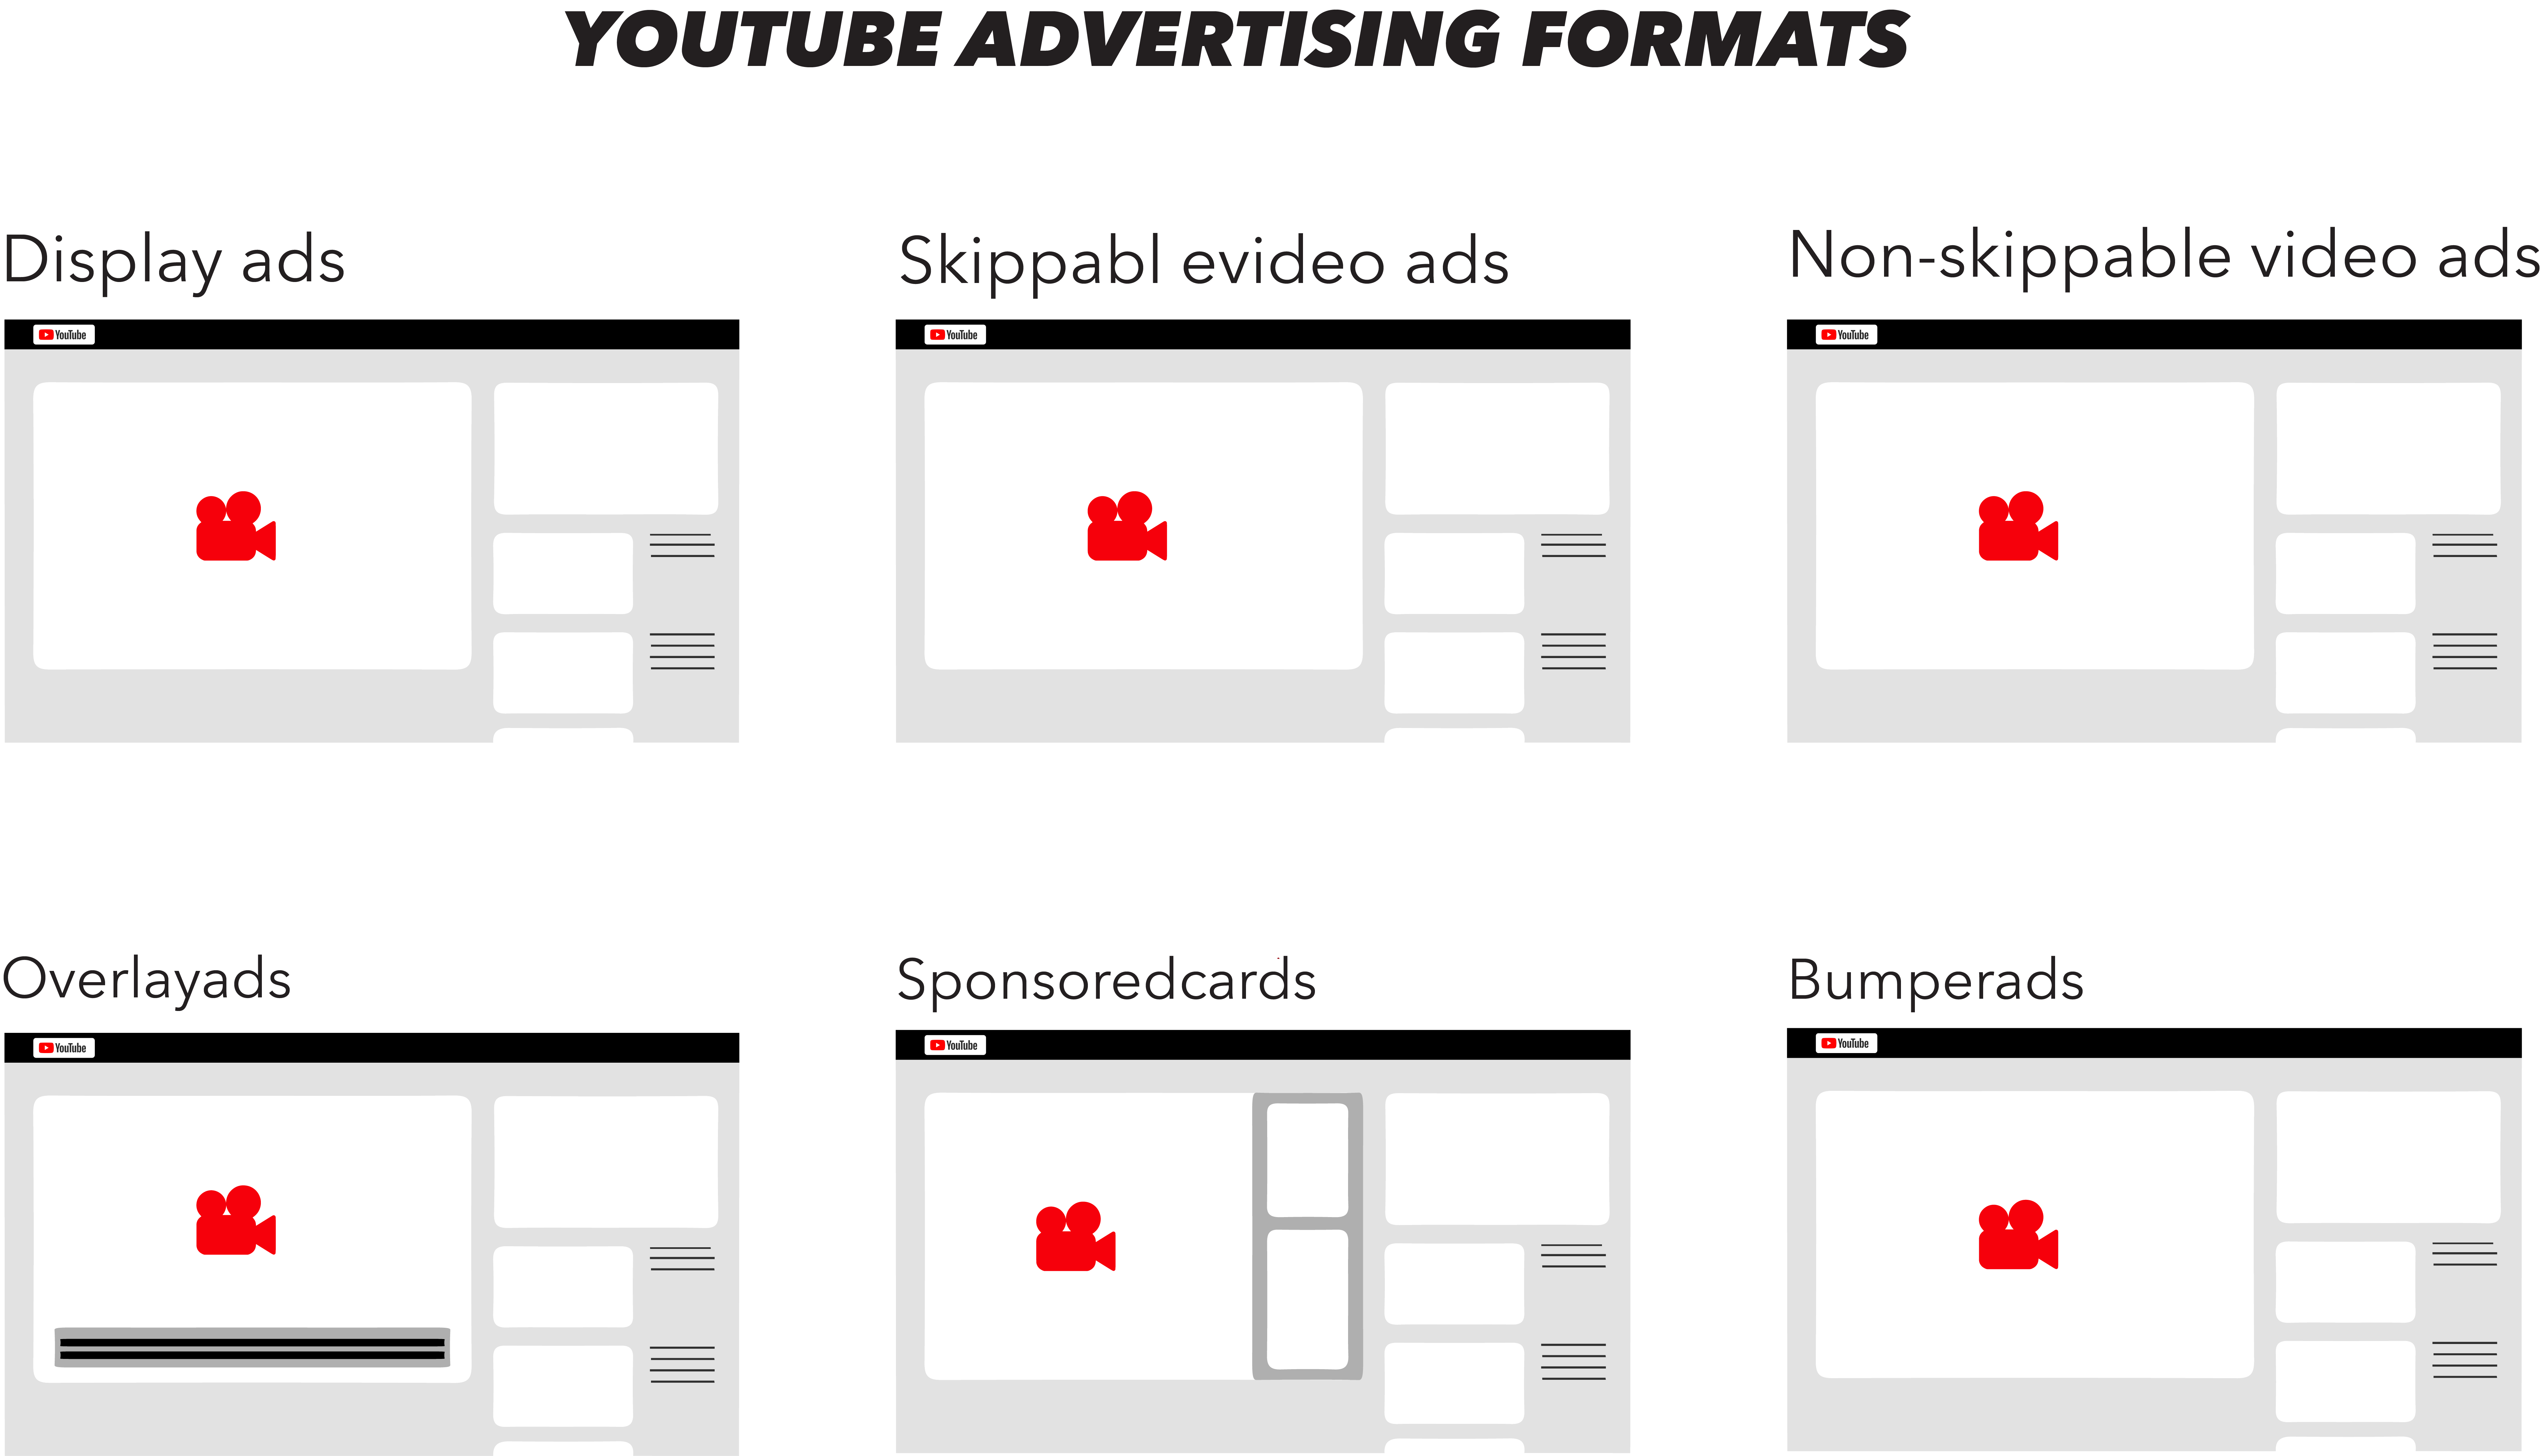 Google Display Anzeige Formate YouTube Ads